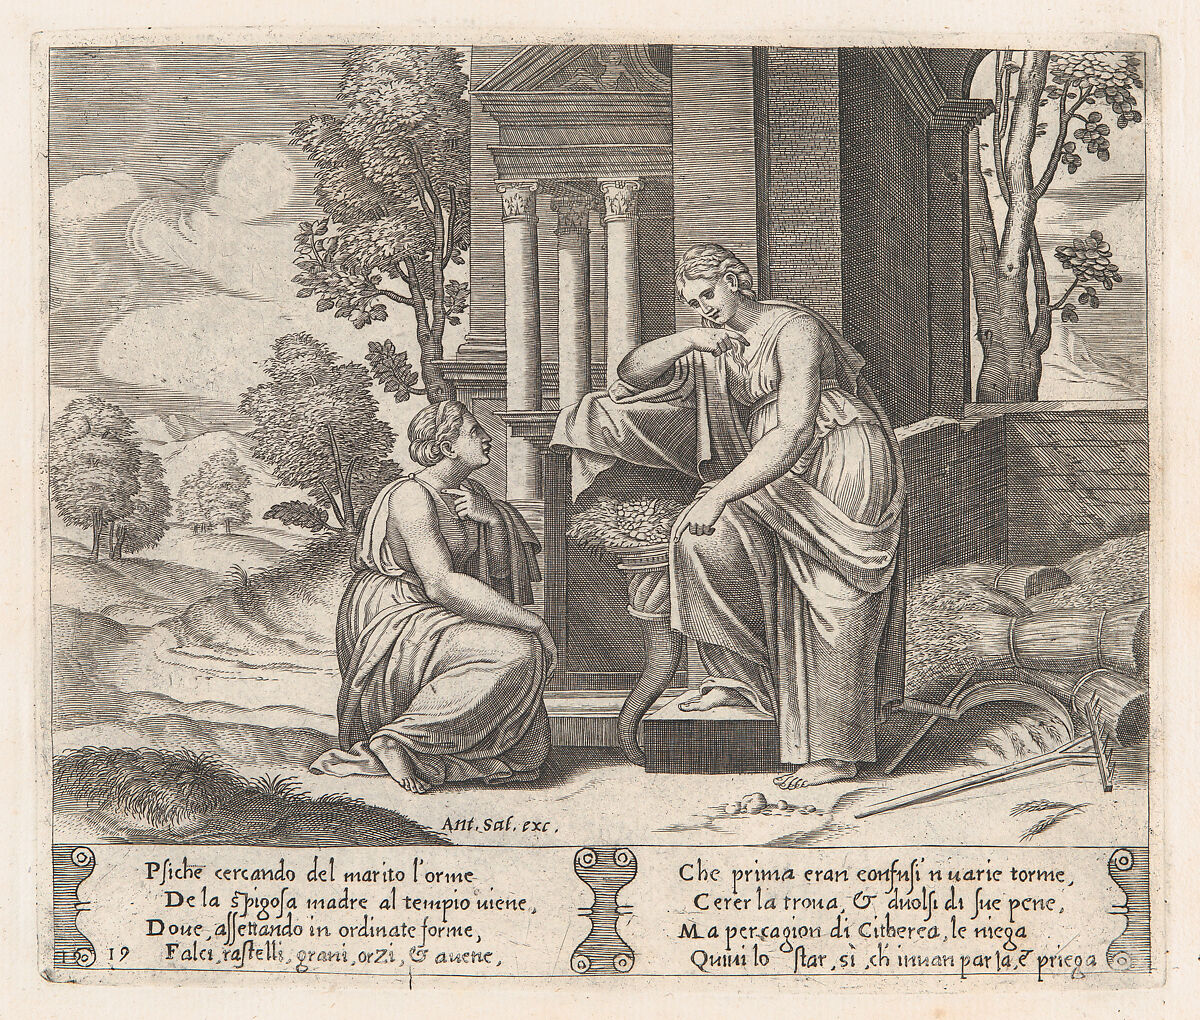 Plate 19: Ceres at right, leaning on a pedestal, refusing to assist Psyche, from "The Story of Cupid and Psyche as told by Apuleius", Master of the Die (Italian, active Rome, ca. 1530–60), Engraving 